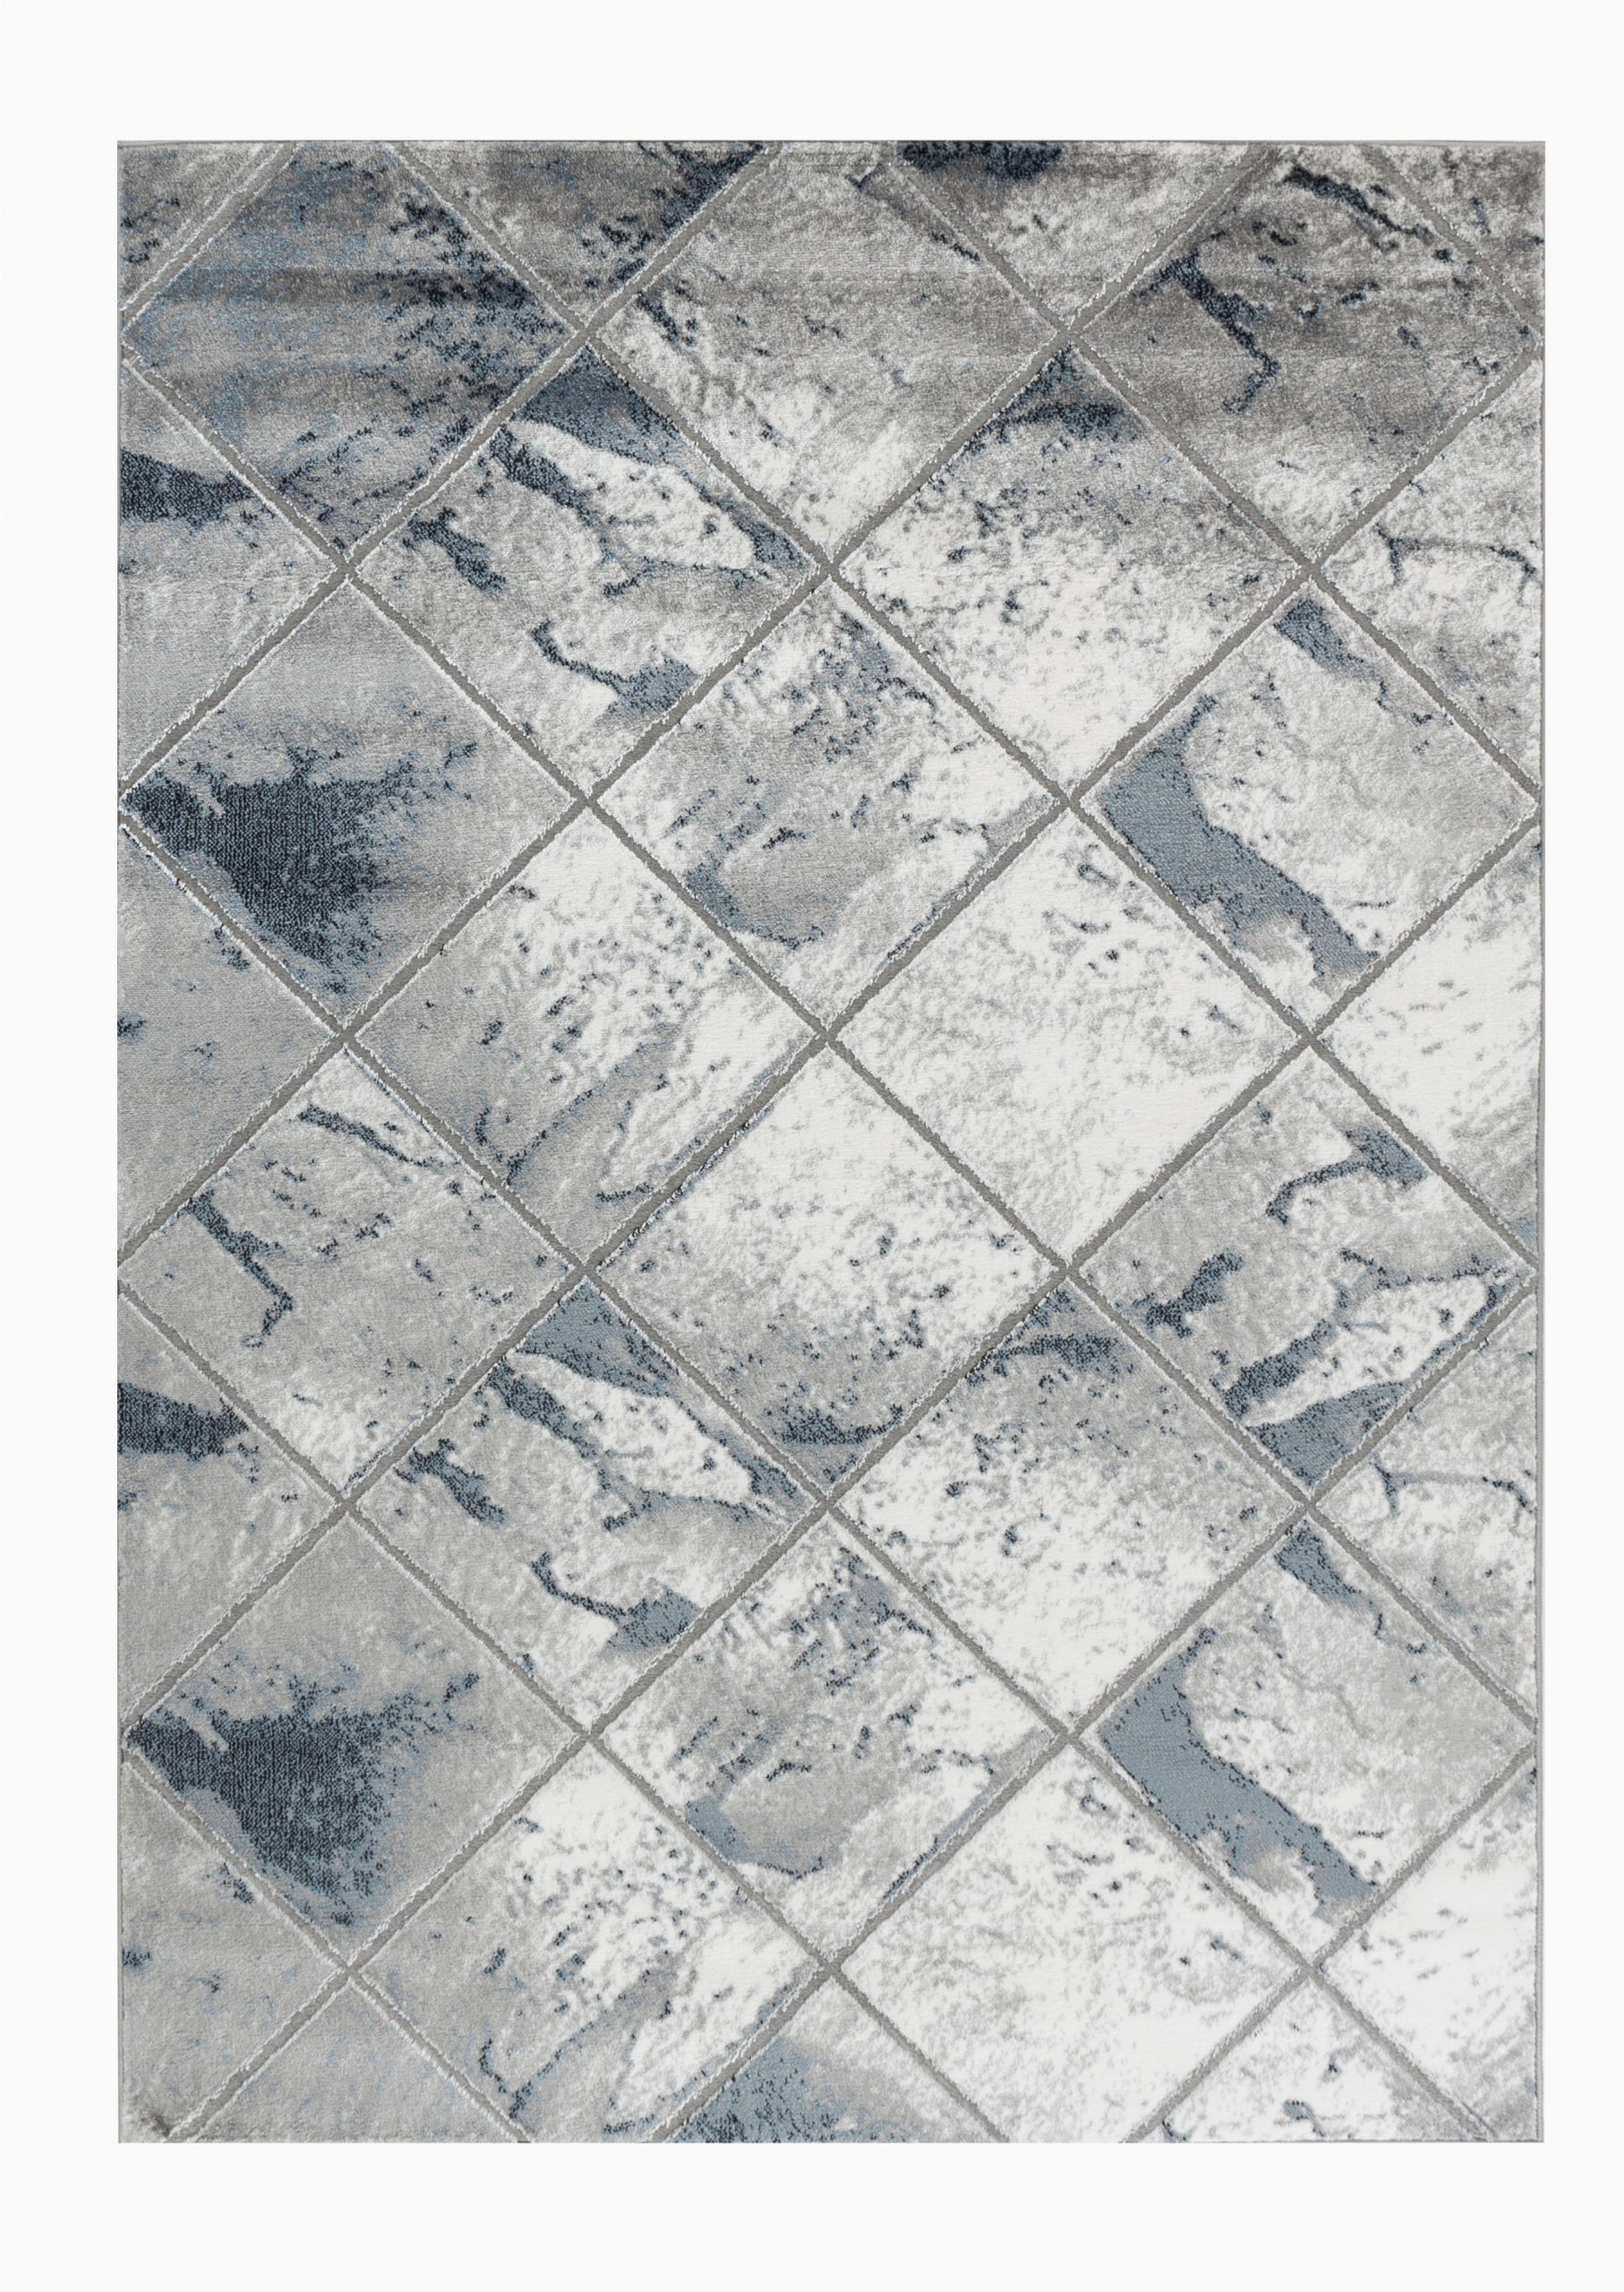 Grey and White area Rug Walmart Allure Collection Gray Blue Marble Diamond Tile Design soft area Rug Walmart